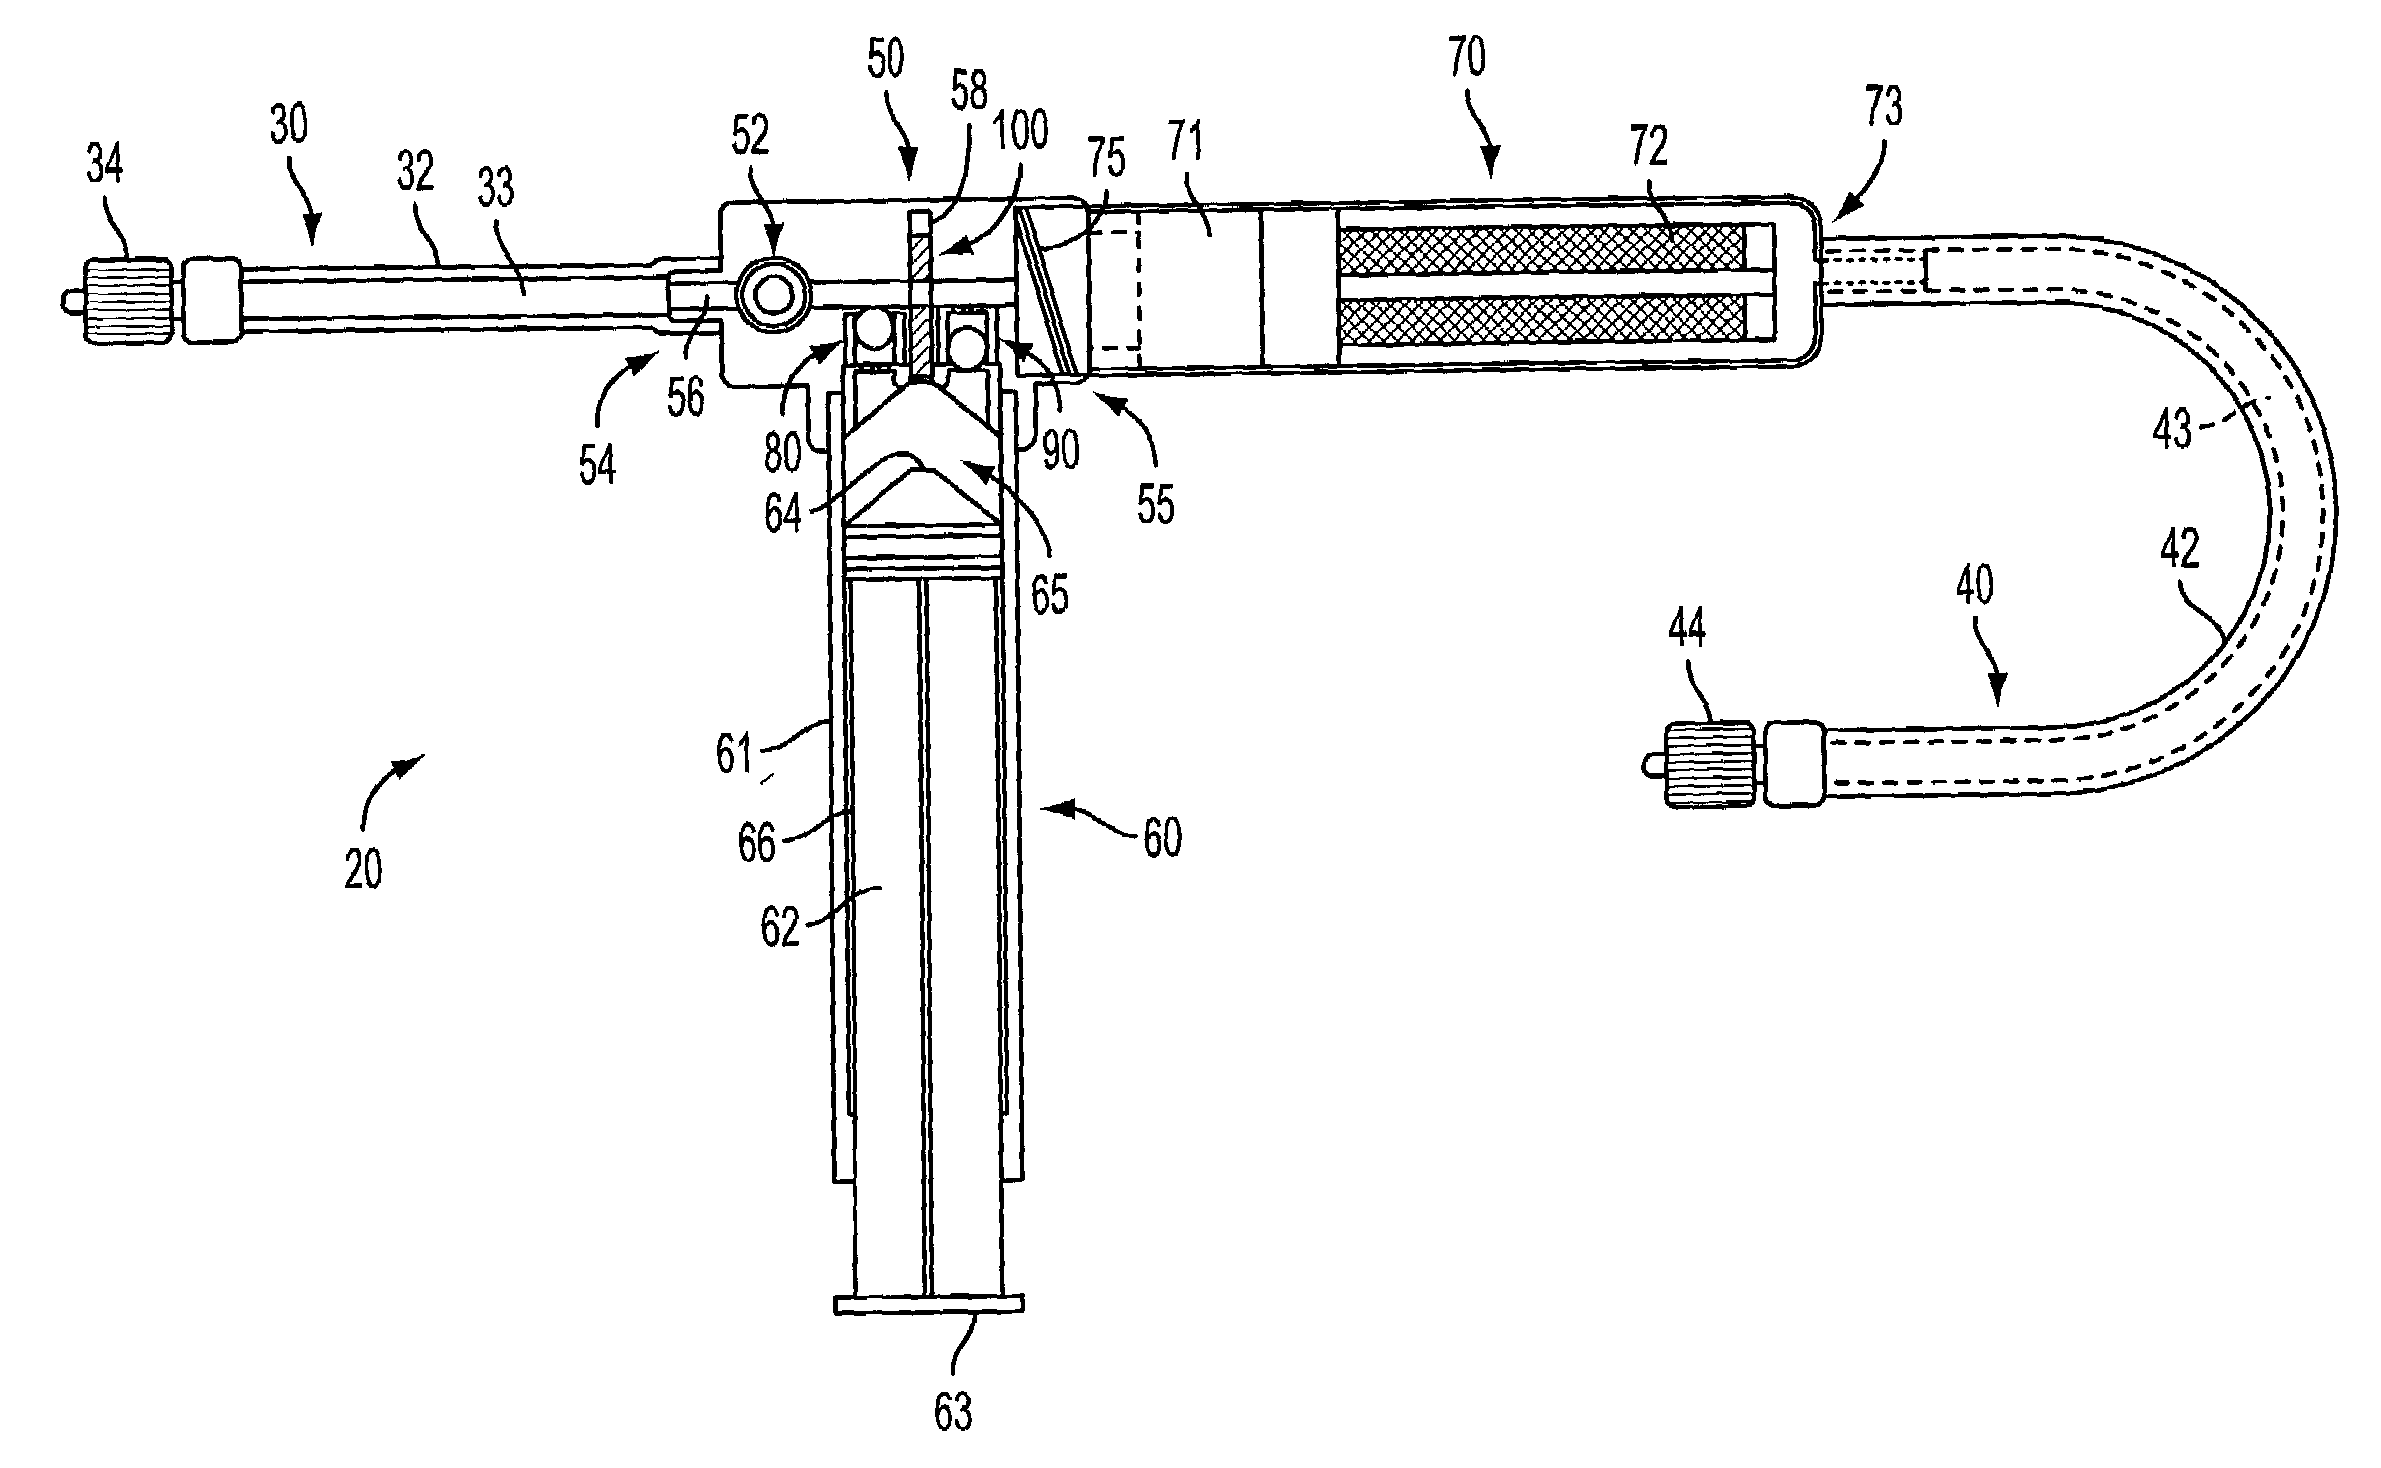 Blood aspiration system and methods of use